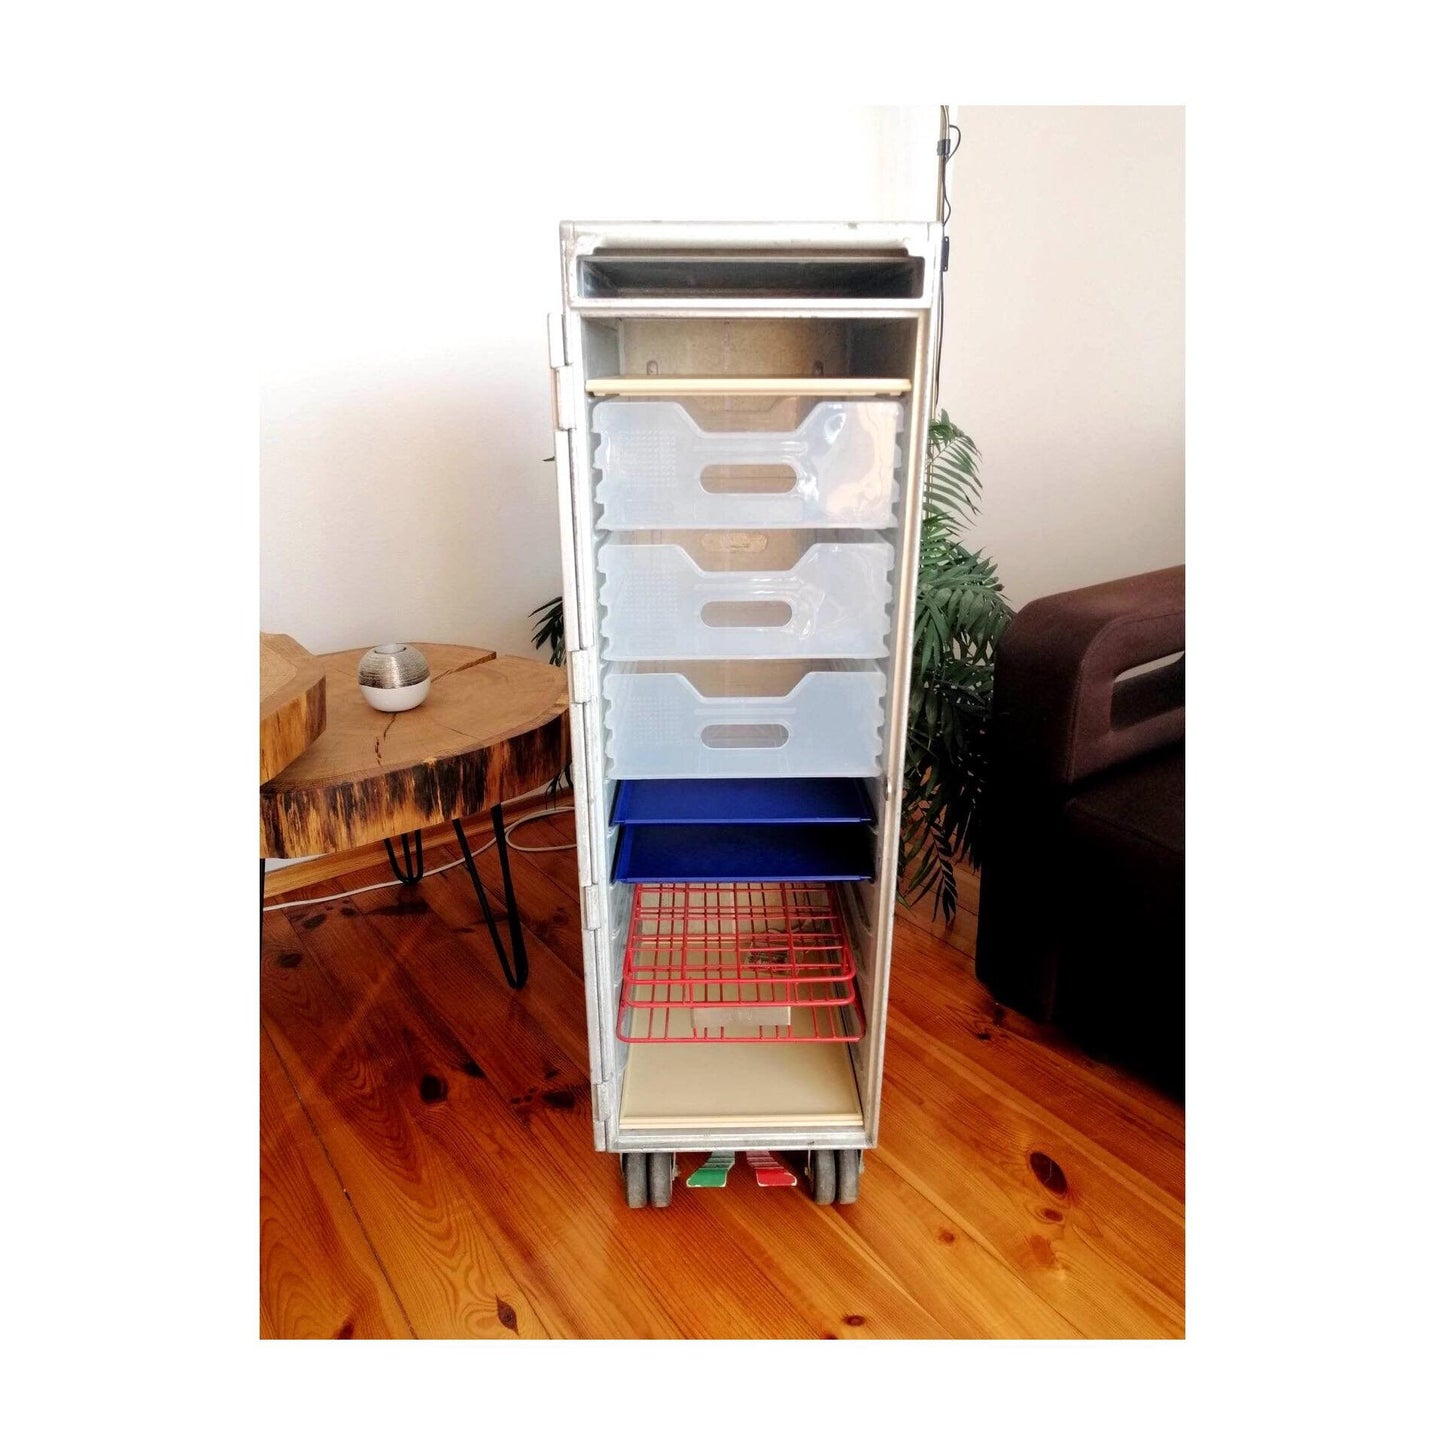 Original Airplane Galley Half Size Cart with Accessories | Airline Galley Trolley TAP Portugal | Driessen